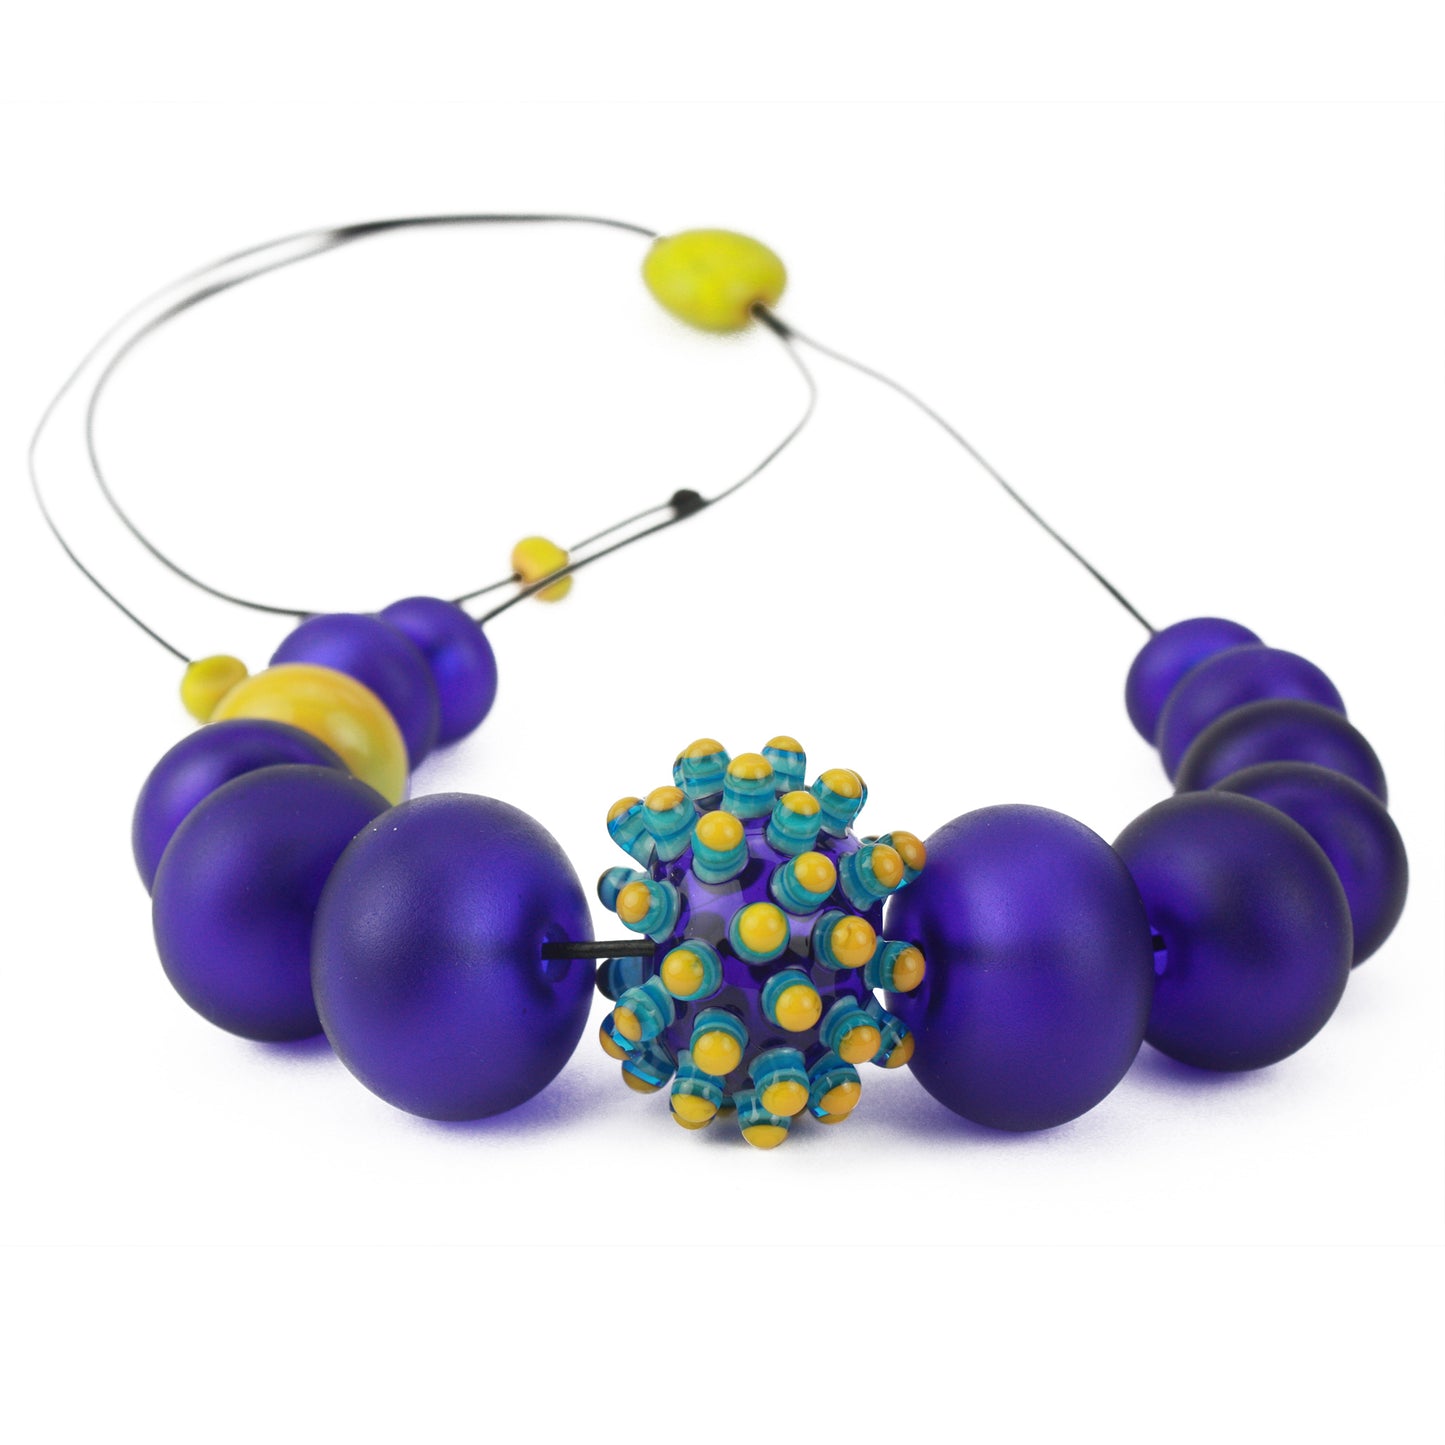 Stacked dot necklace -Blue and yellow